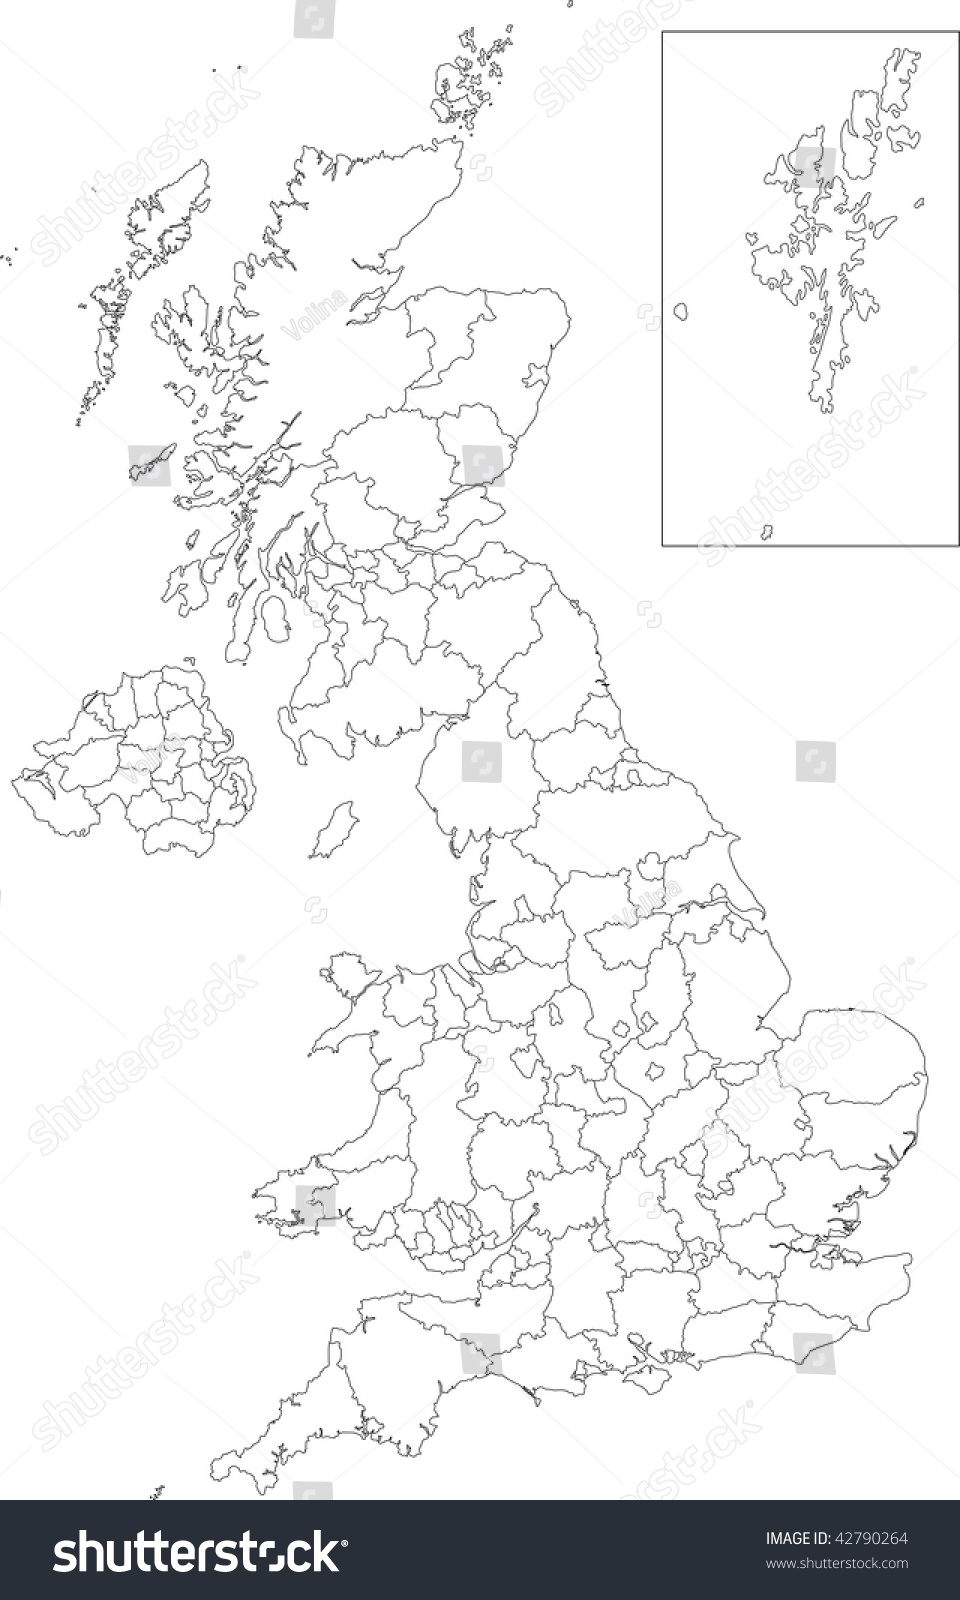 Administrative Divisions Of The United Kingdom Stock Photo 42790264 ...